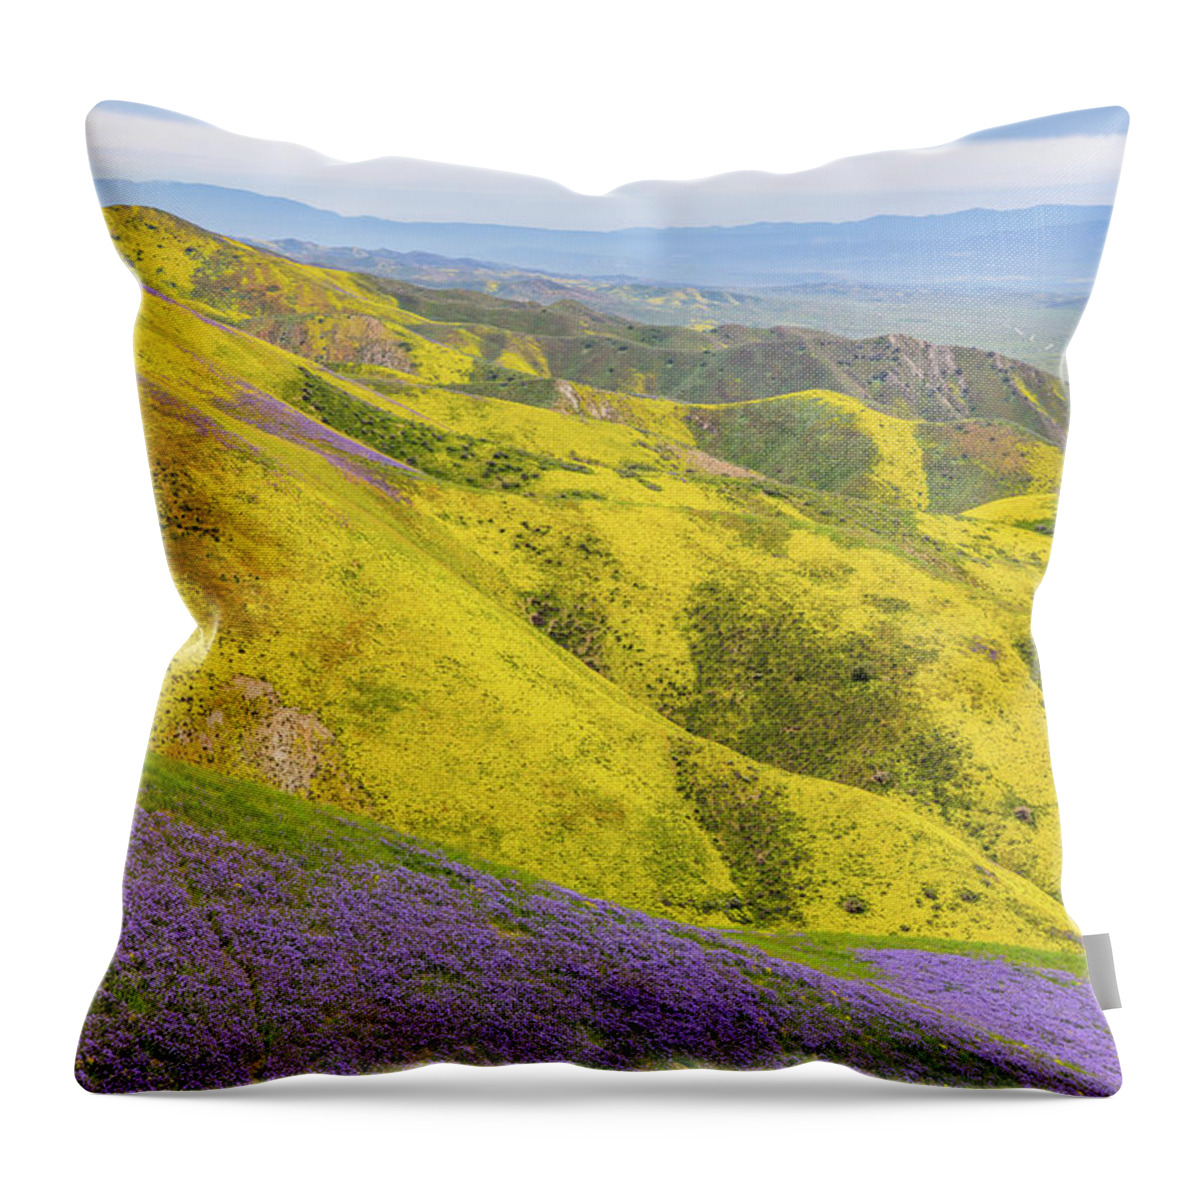 California Throw Pillow featuring the photograph Southern View by Marc Crumpler